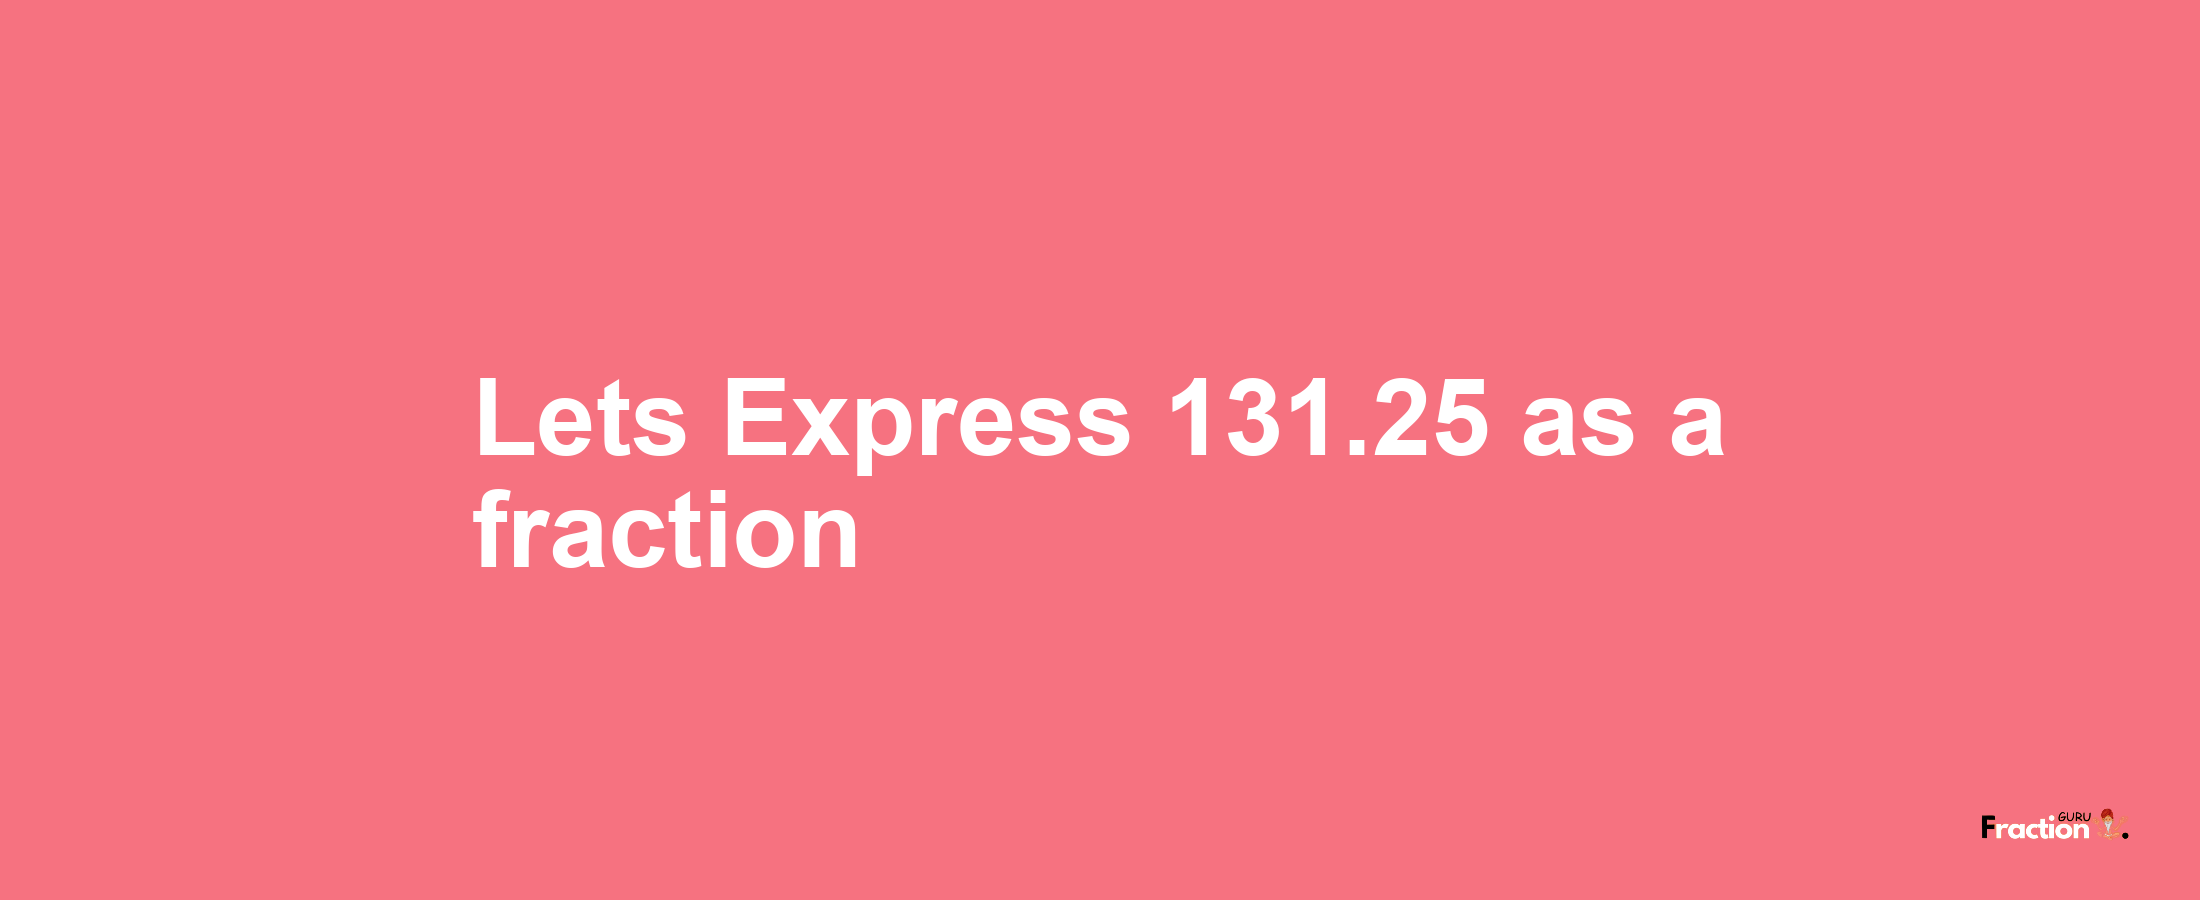 Lets Express 131.25 as afraction